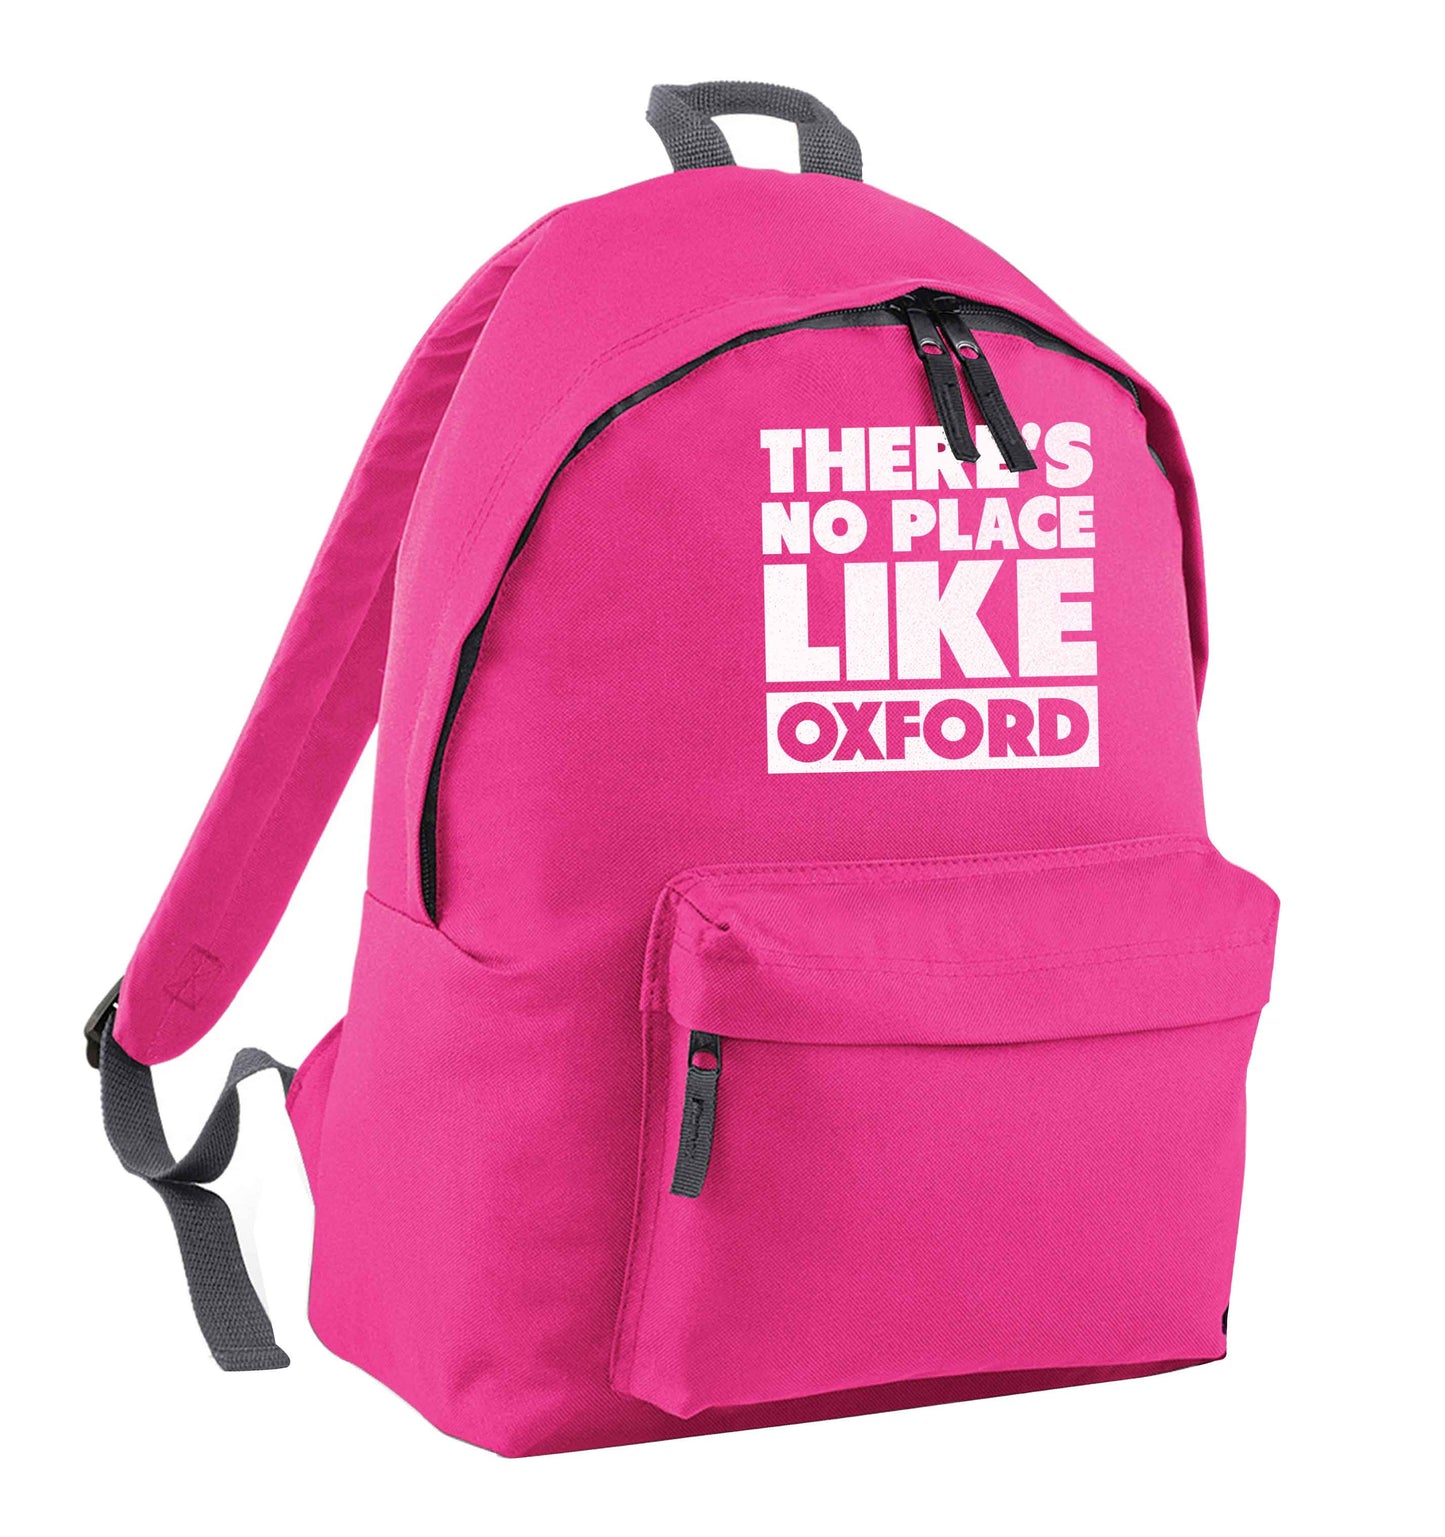 There's no place like Oxford pink adults backpack